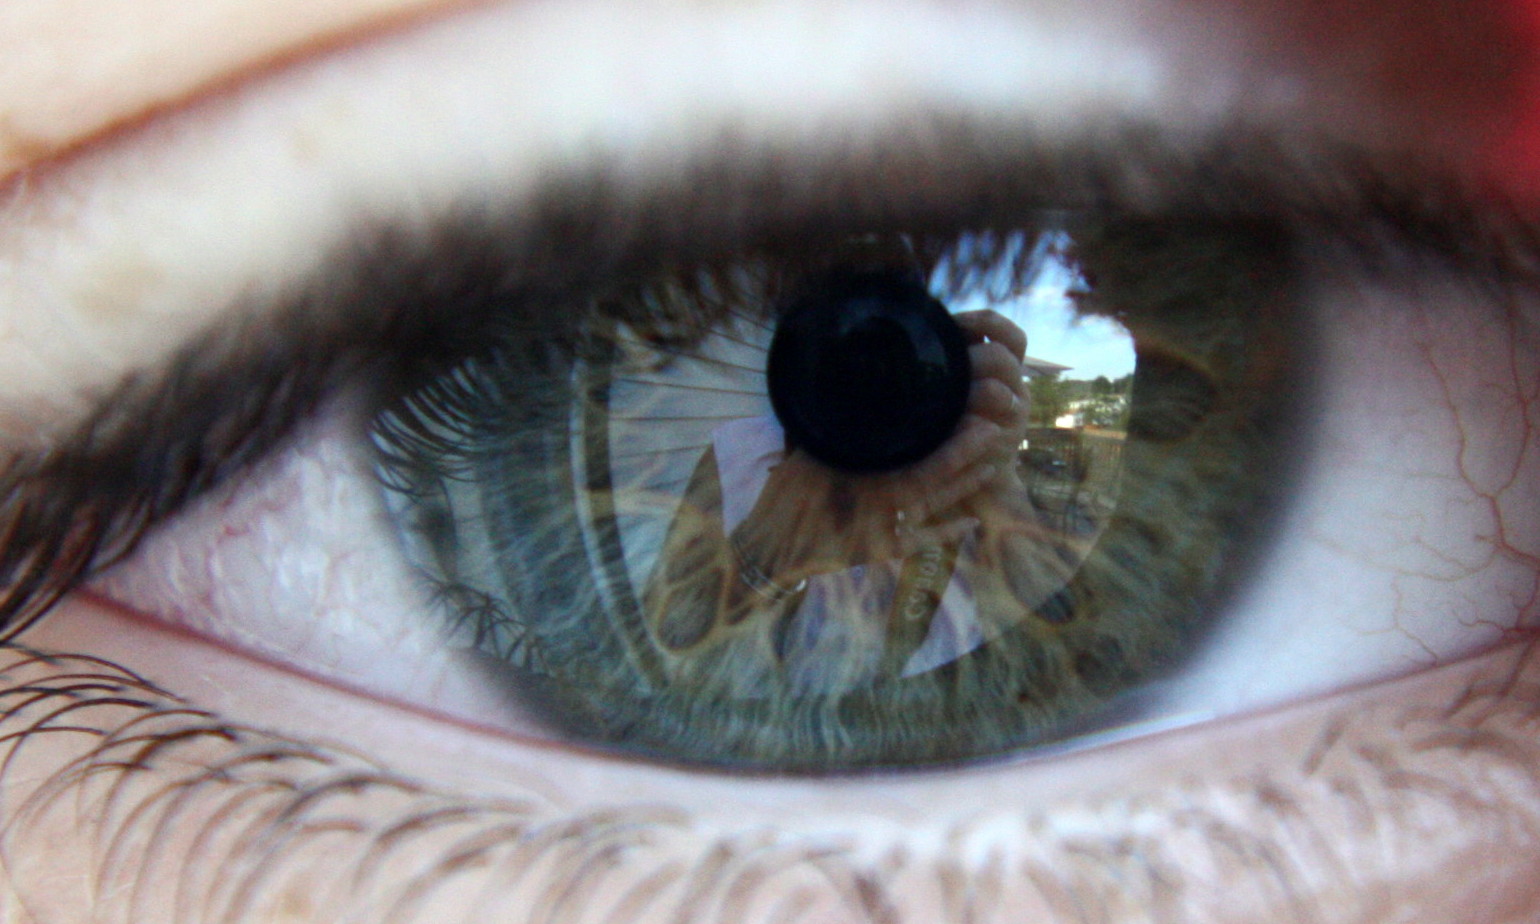 the iris of an eye with reflection of buildings in it